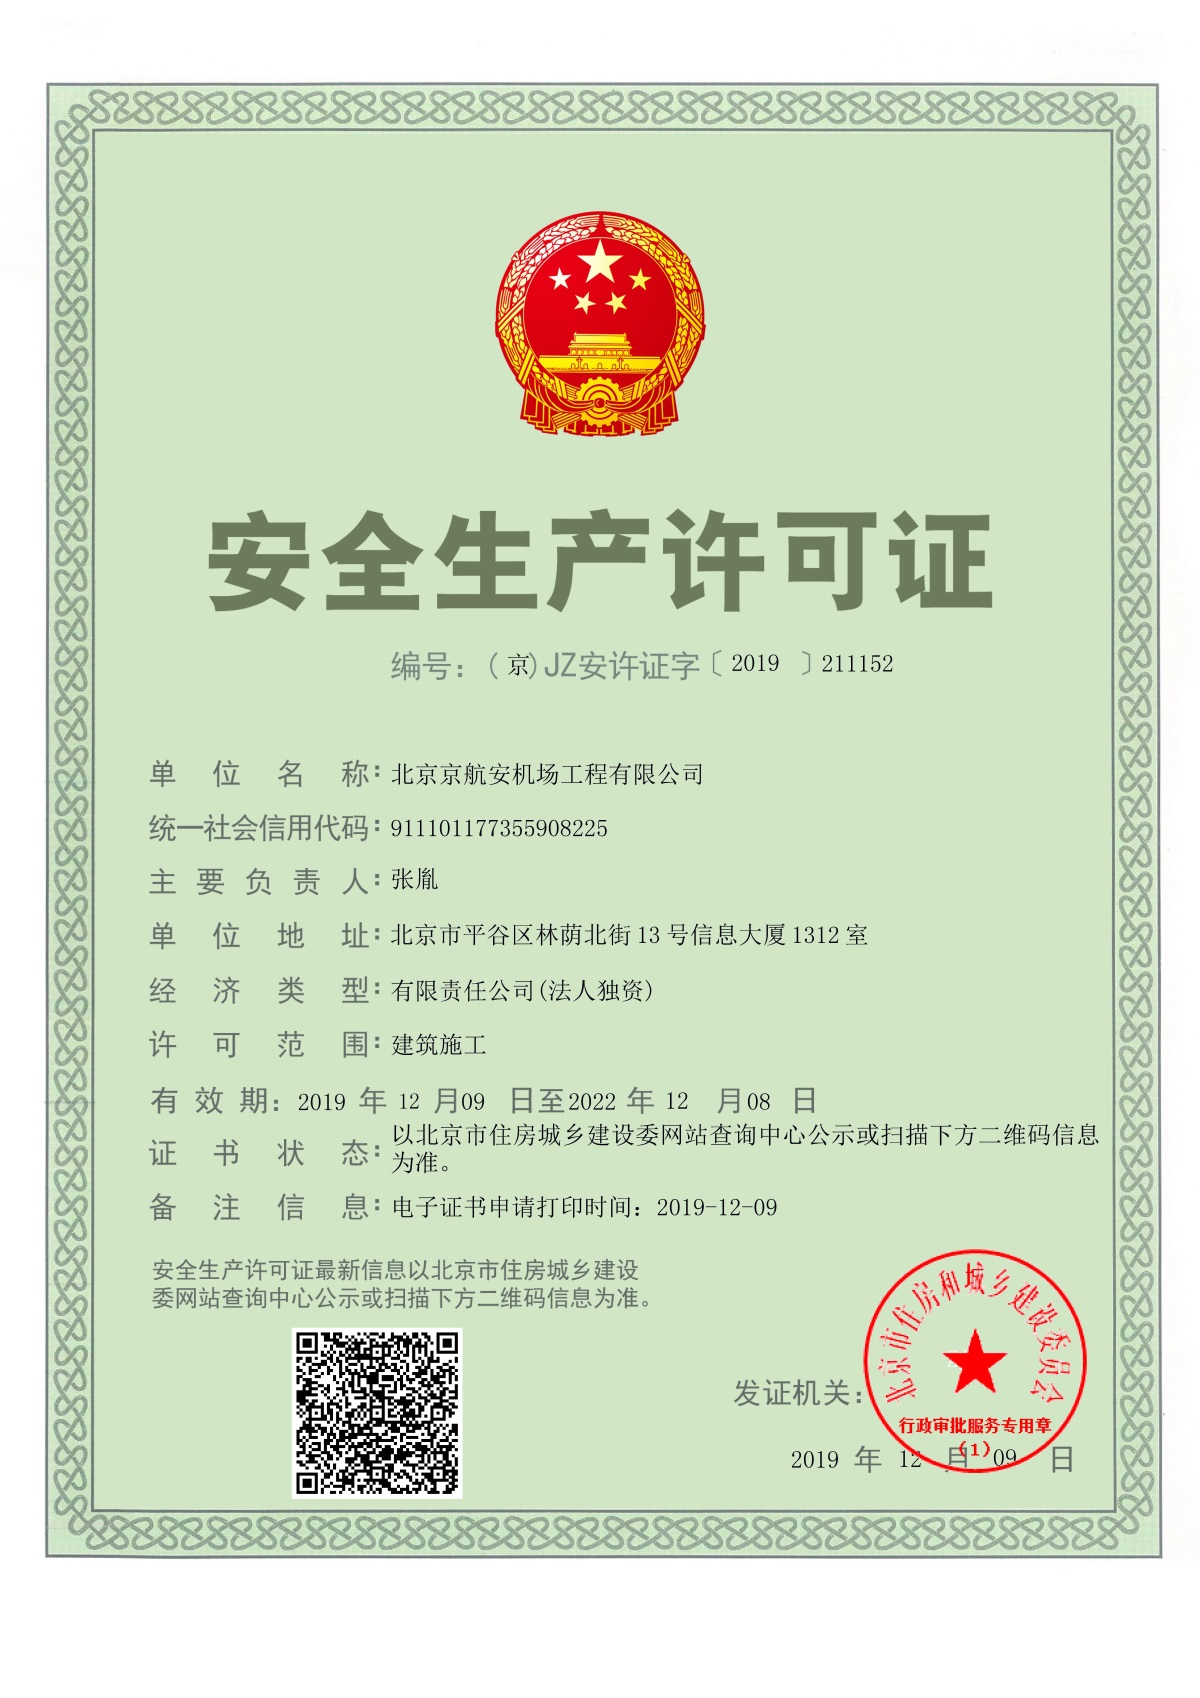 Safety production Permit